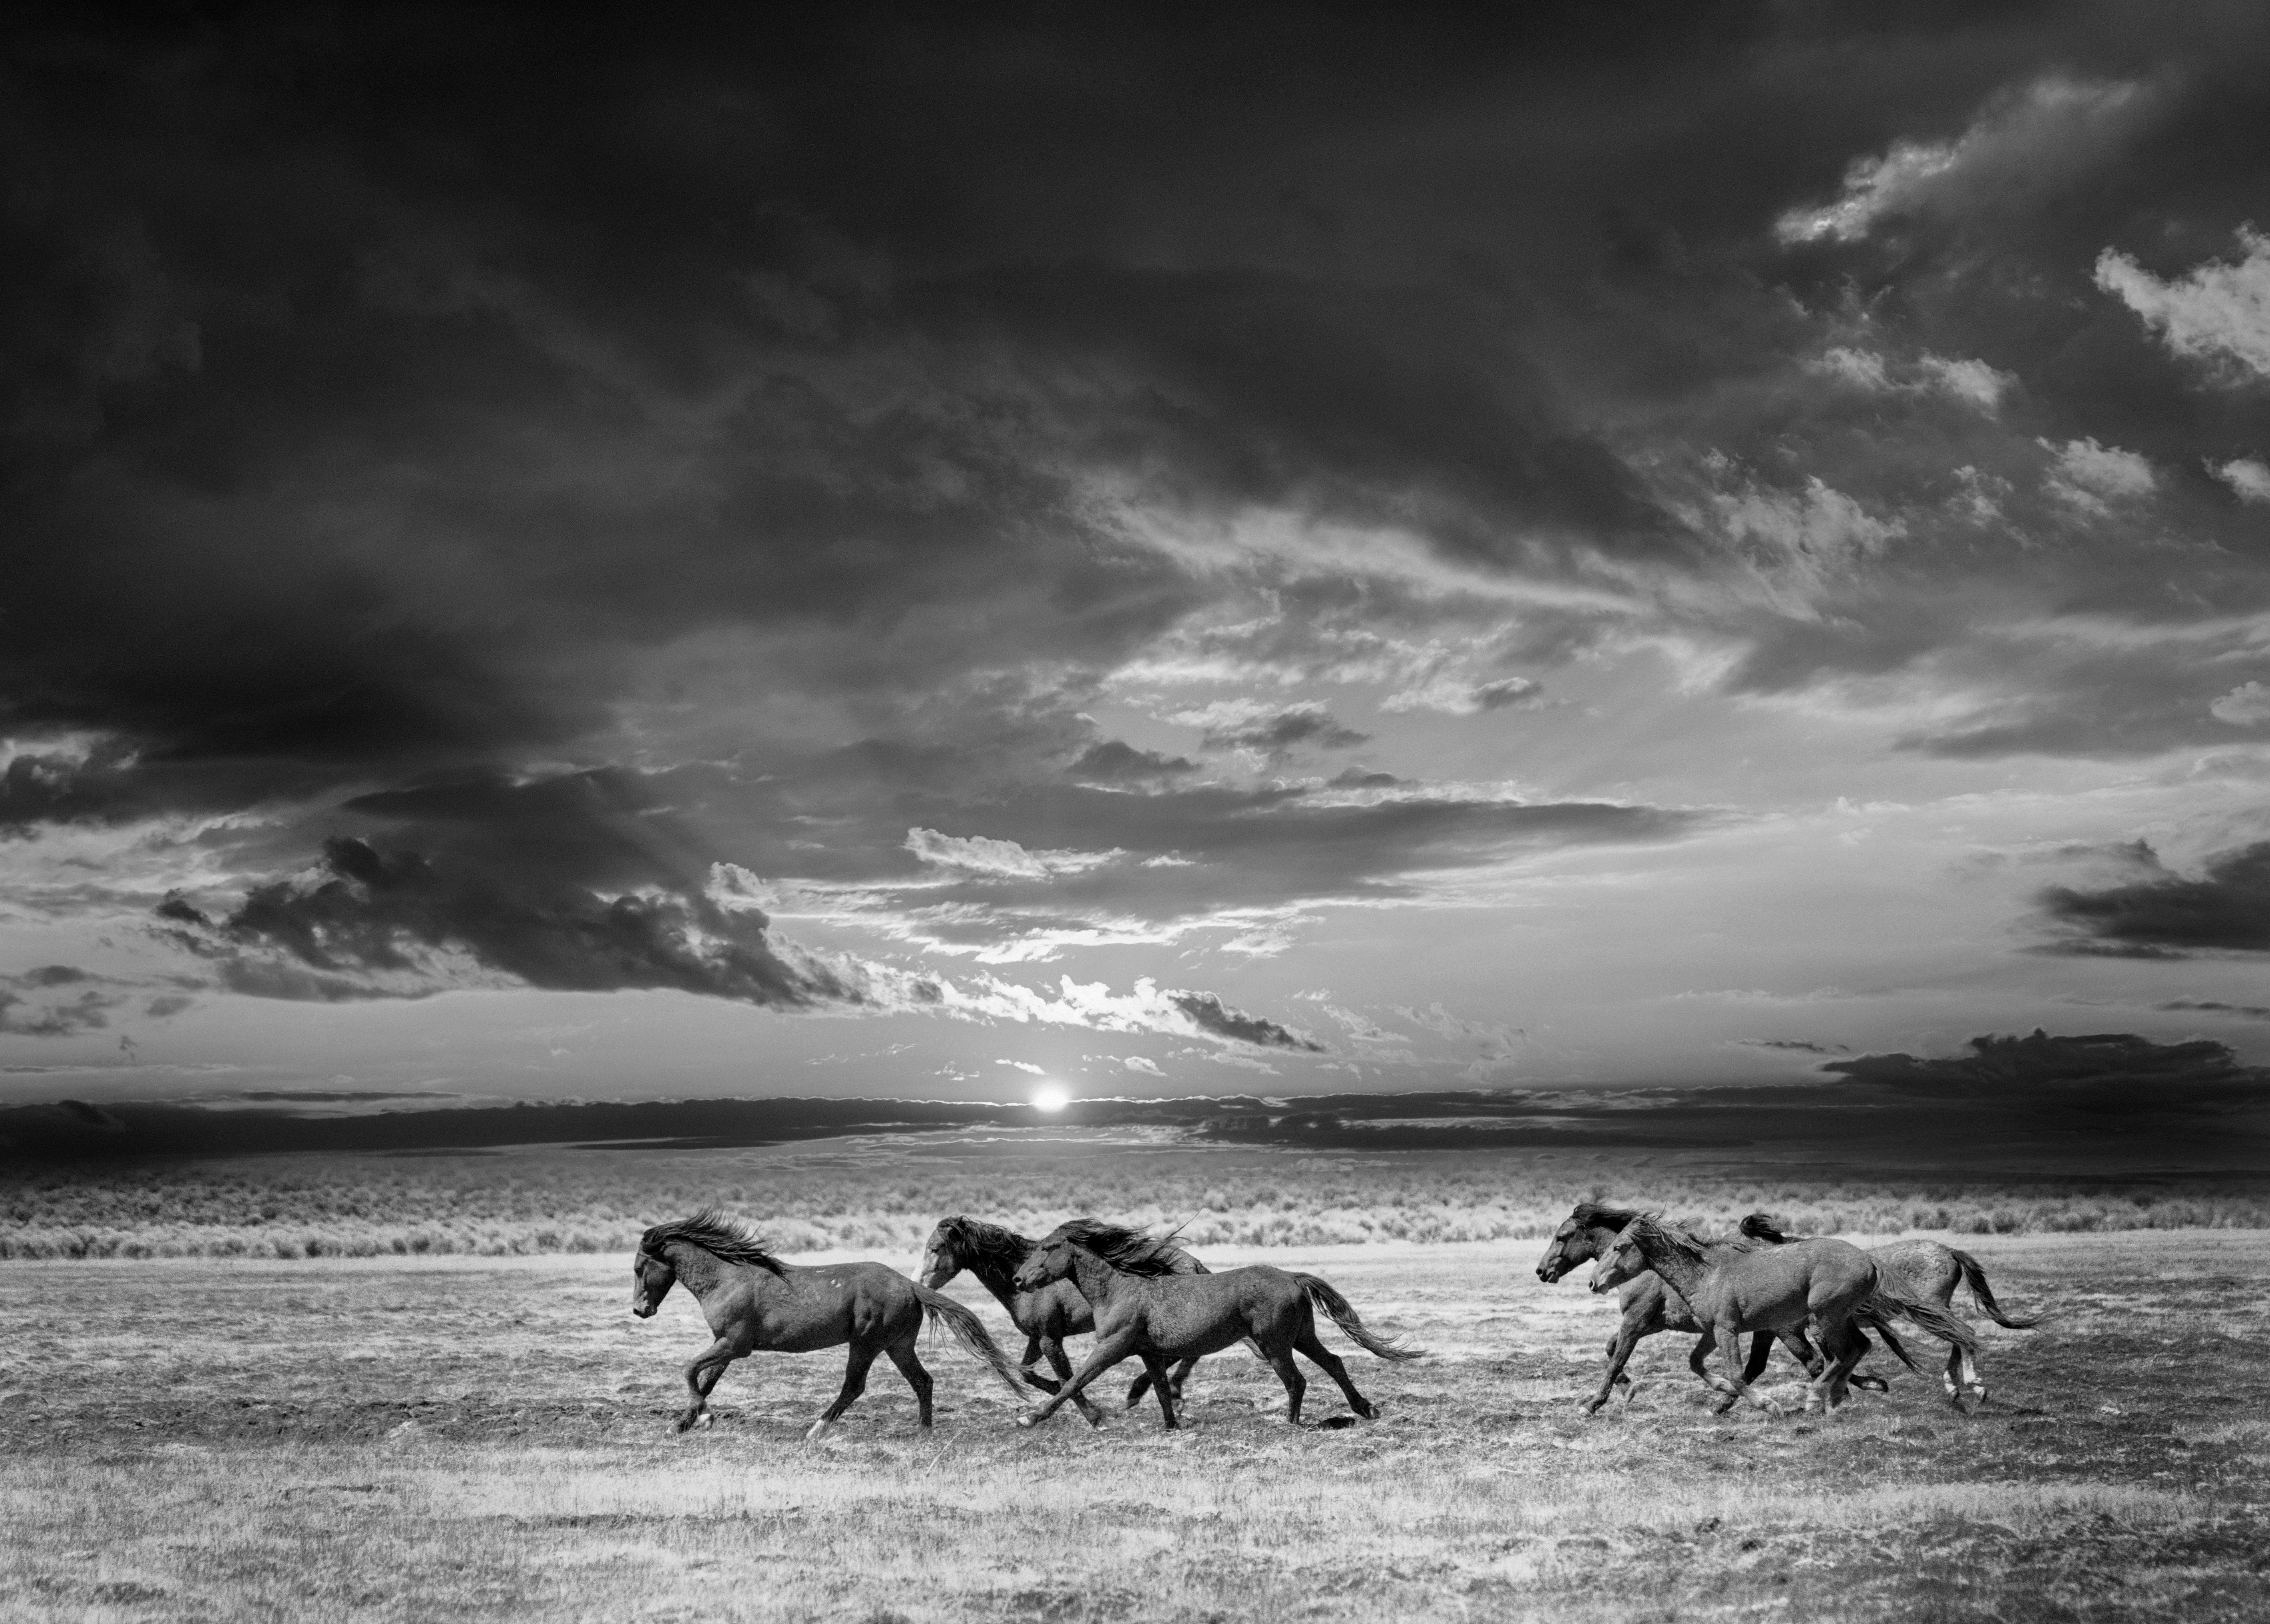 Shane Russeck Animal Print -  Black and White Photography of Wild Horses, 36x48 "Chasing the Light" Mustangs